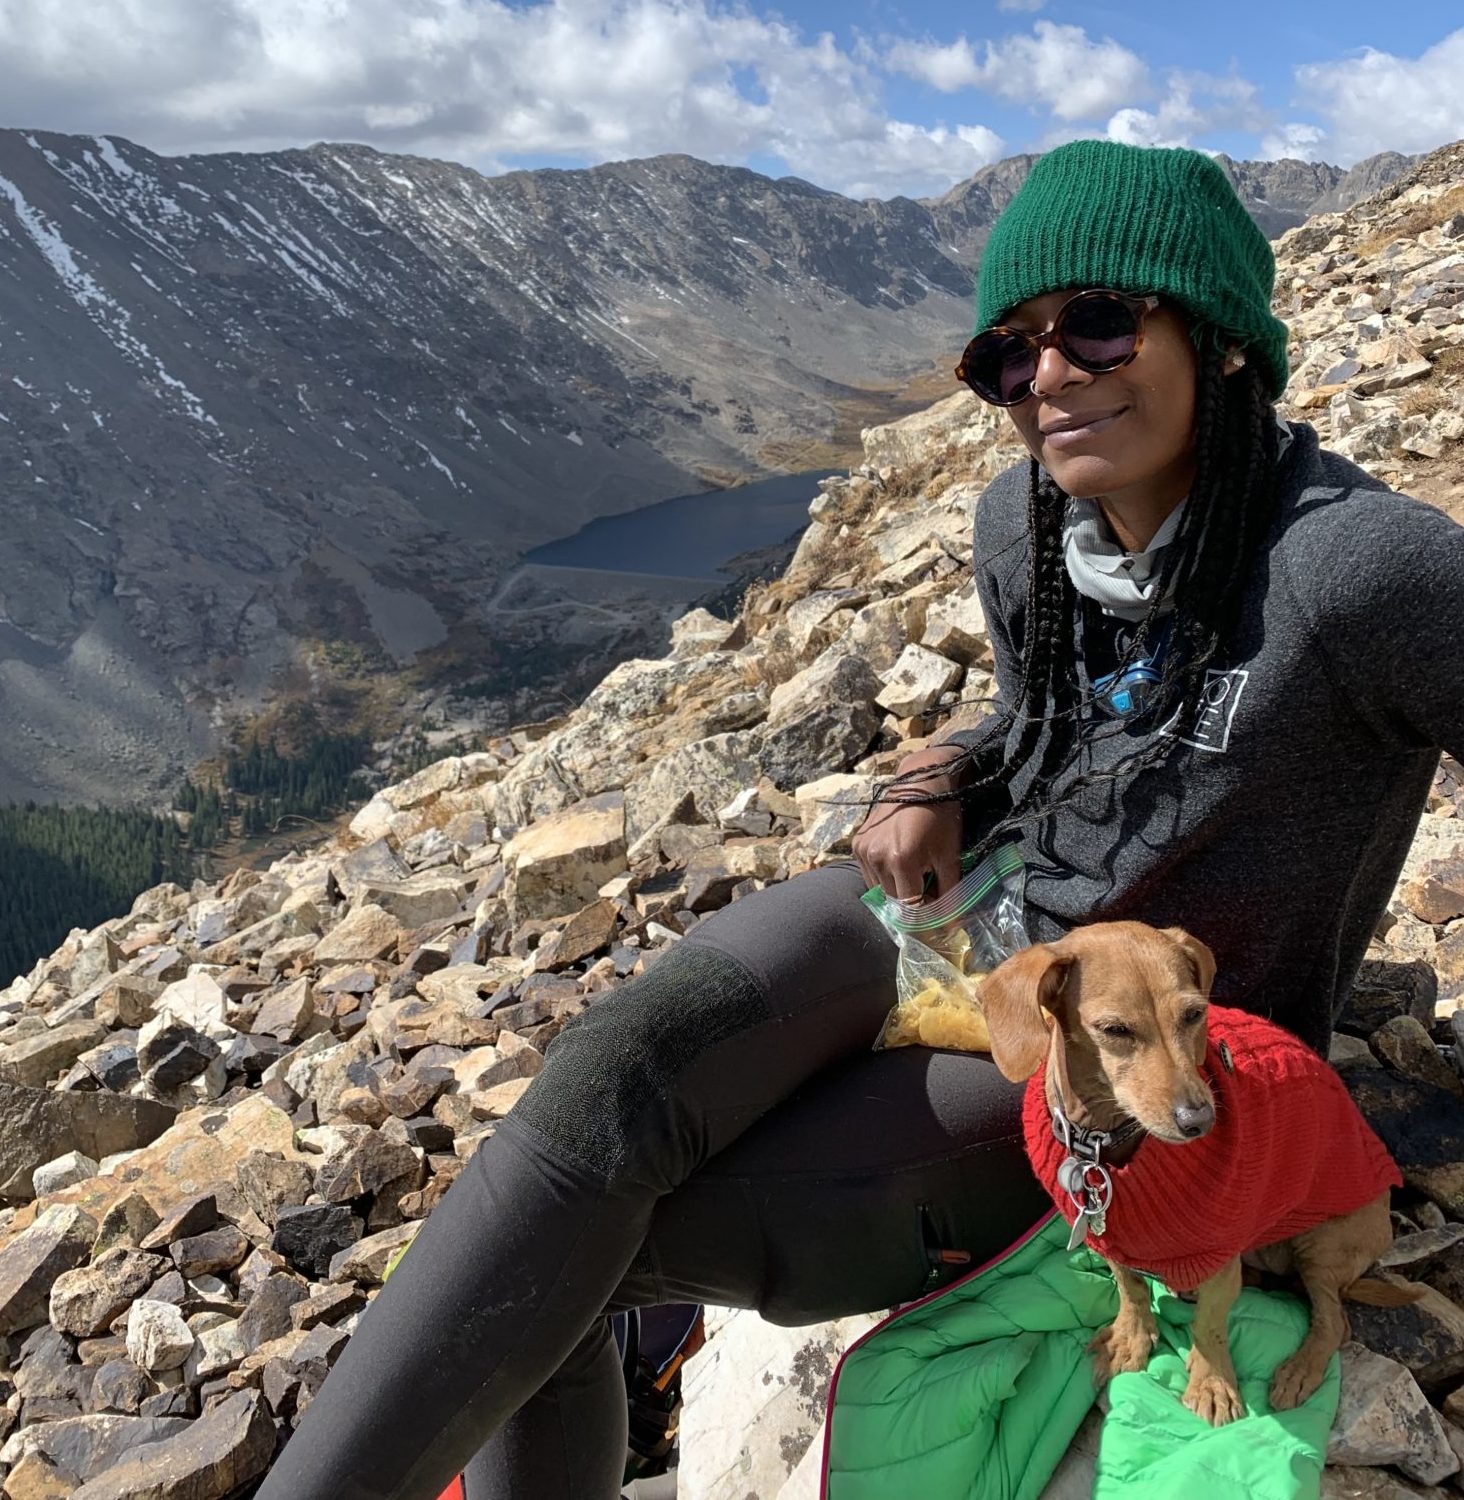 Trail Tips for Hiking With Your Dog